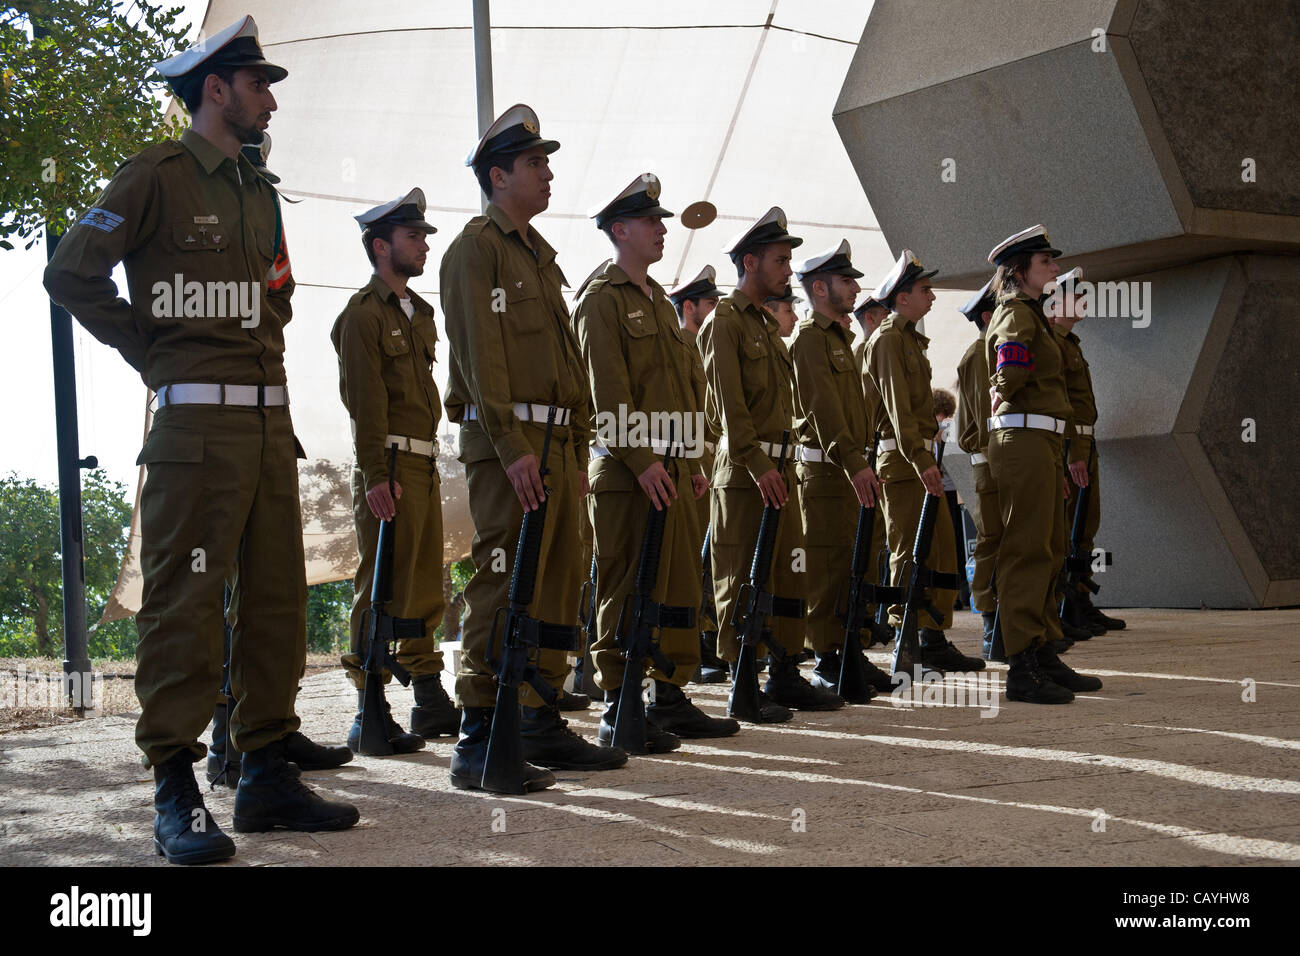 Soldiers of the IDF take part in a ceremony commemorating Allied victory over Nazi Germany at Yad Vashem Holocaust Museum. Jerusalem, Israel. 9-May-2012. Stock Photo